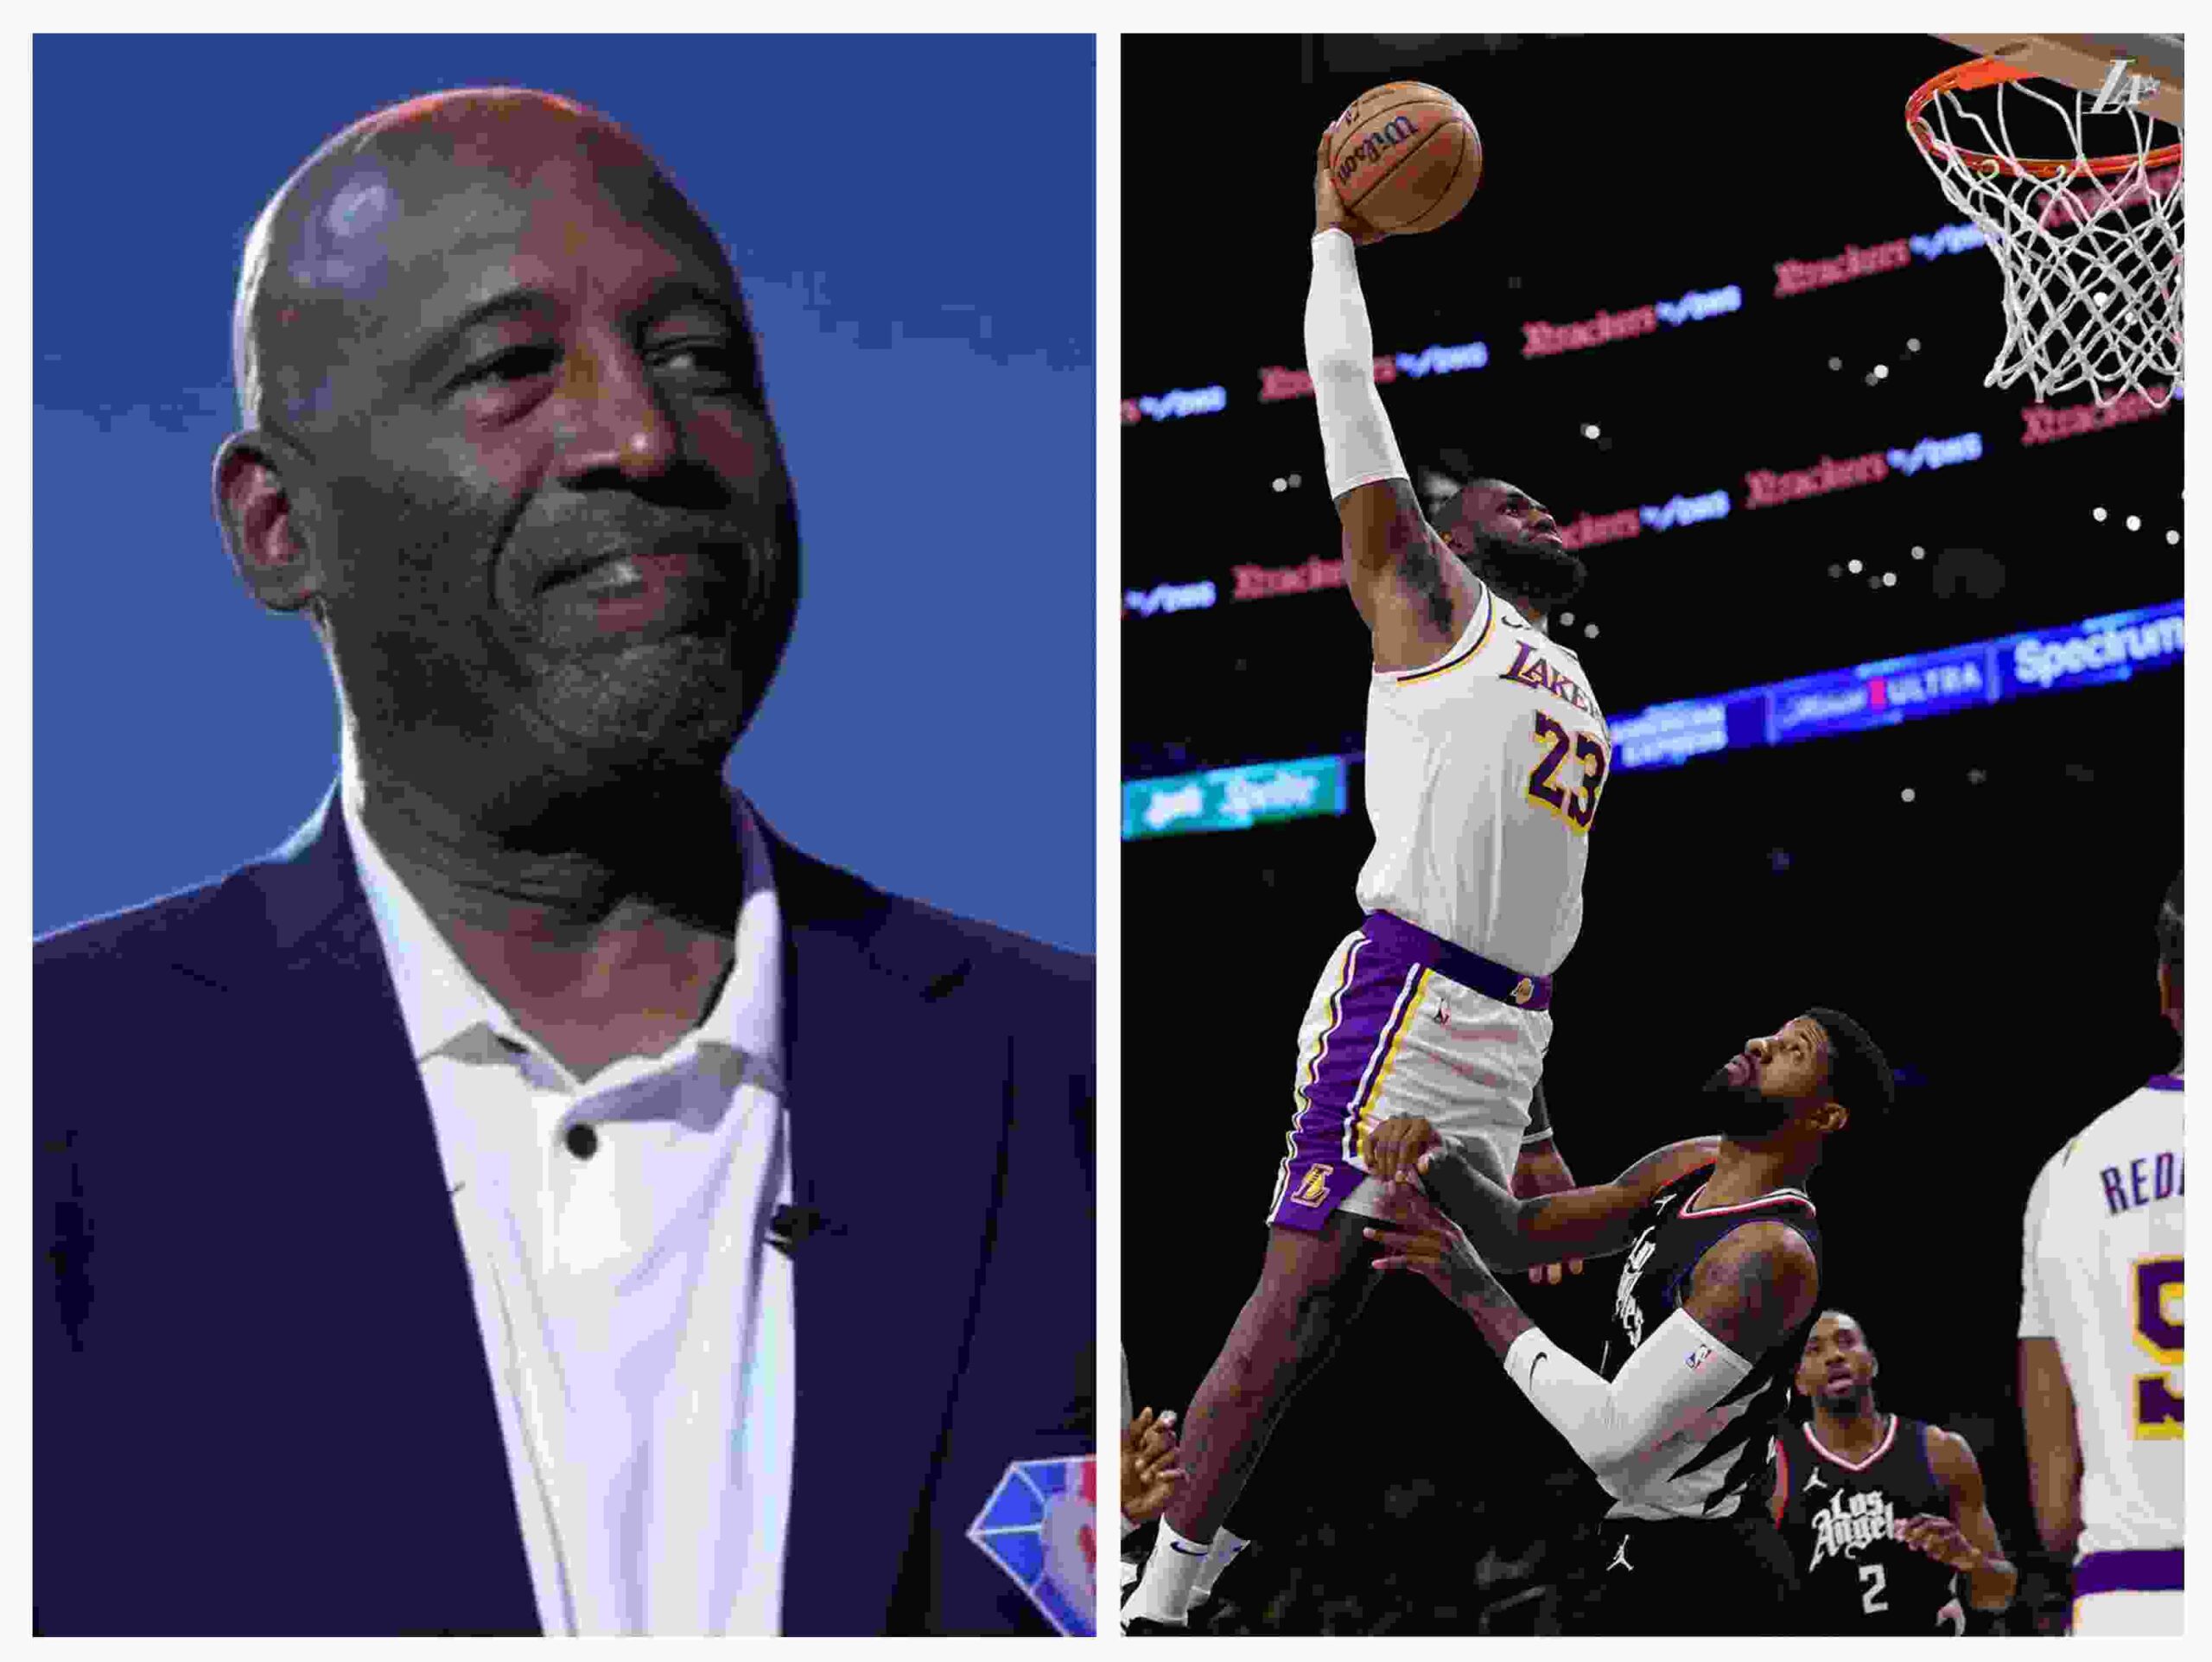 Lebron James' ferocious Dunk on Paul George remind James Worthy of the Julius Erving in the 70s